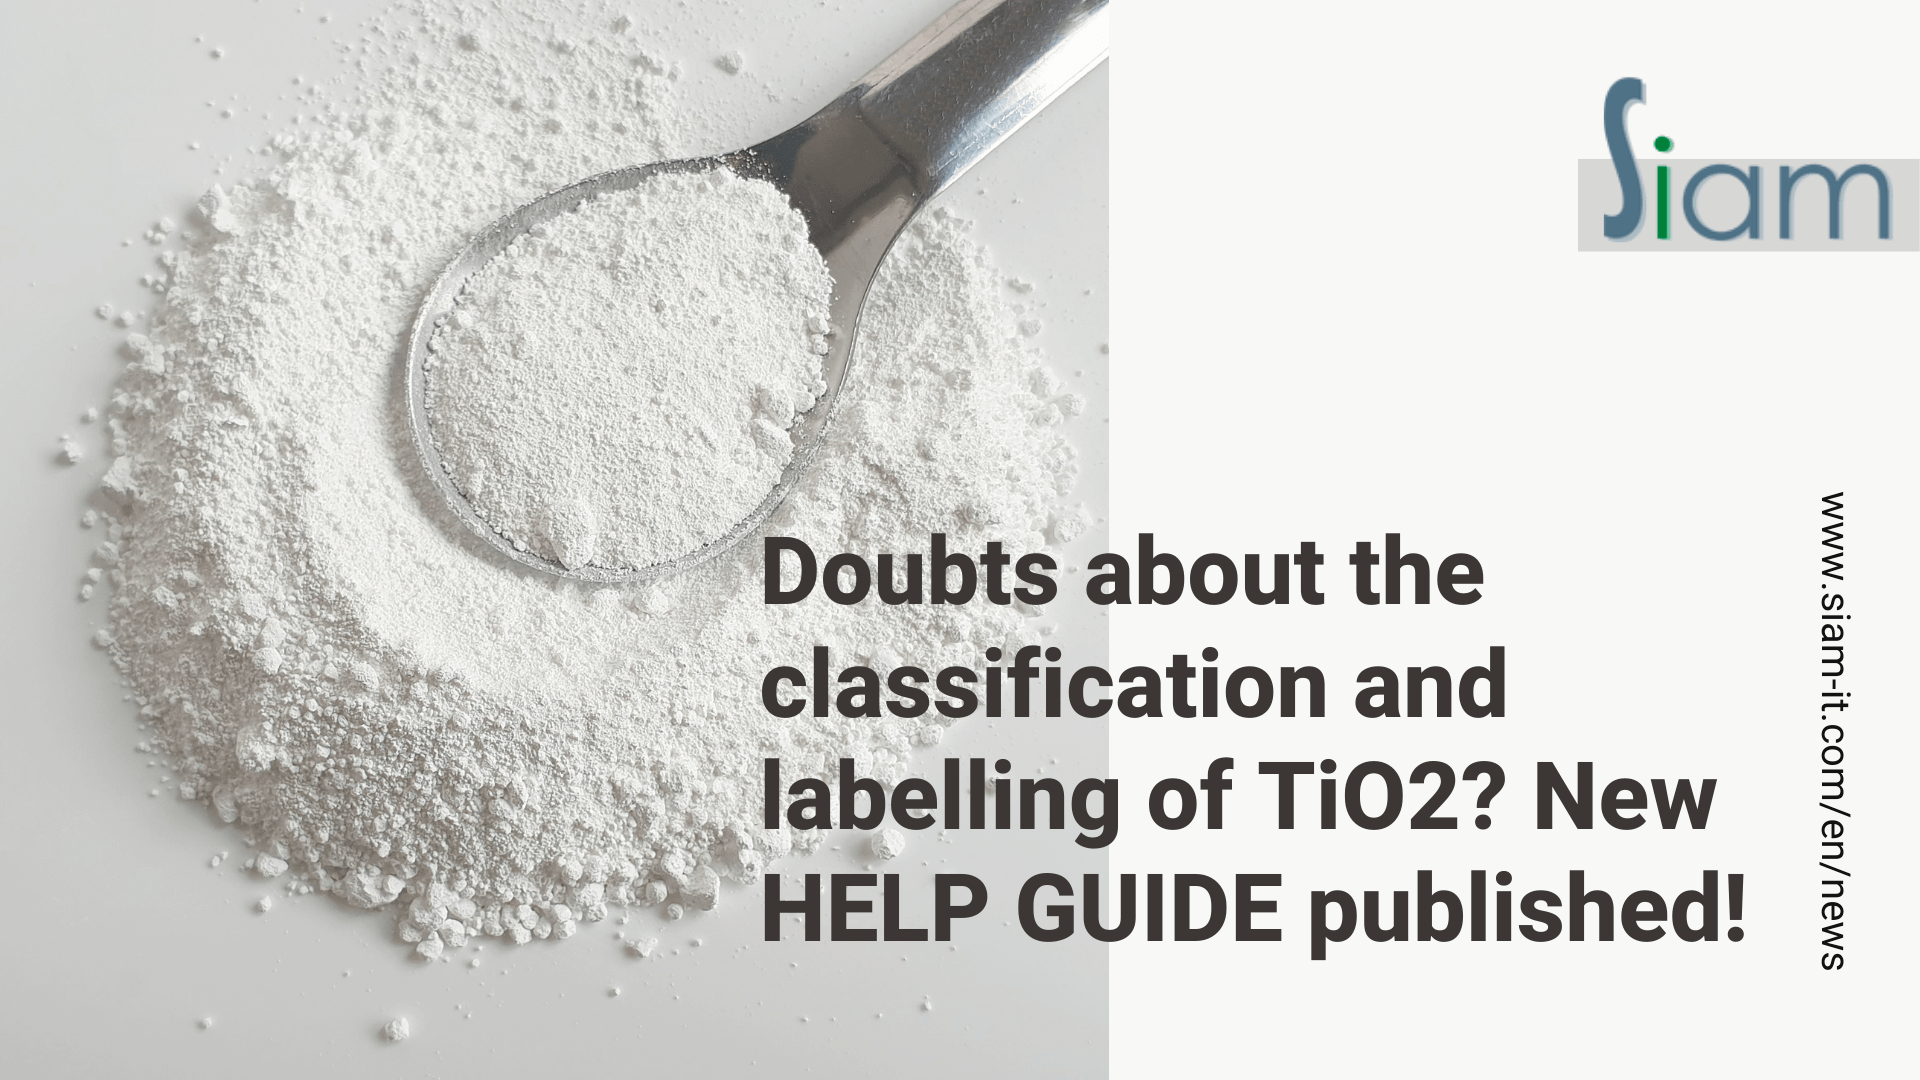 Doubts about the classification and labelling of titanium dioxide (TiO2) following regulation (EU) 2020/2017? New HELP GUIDE published!